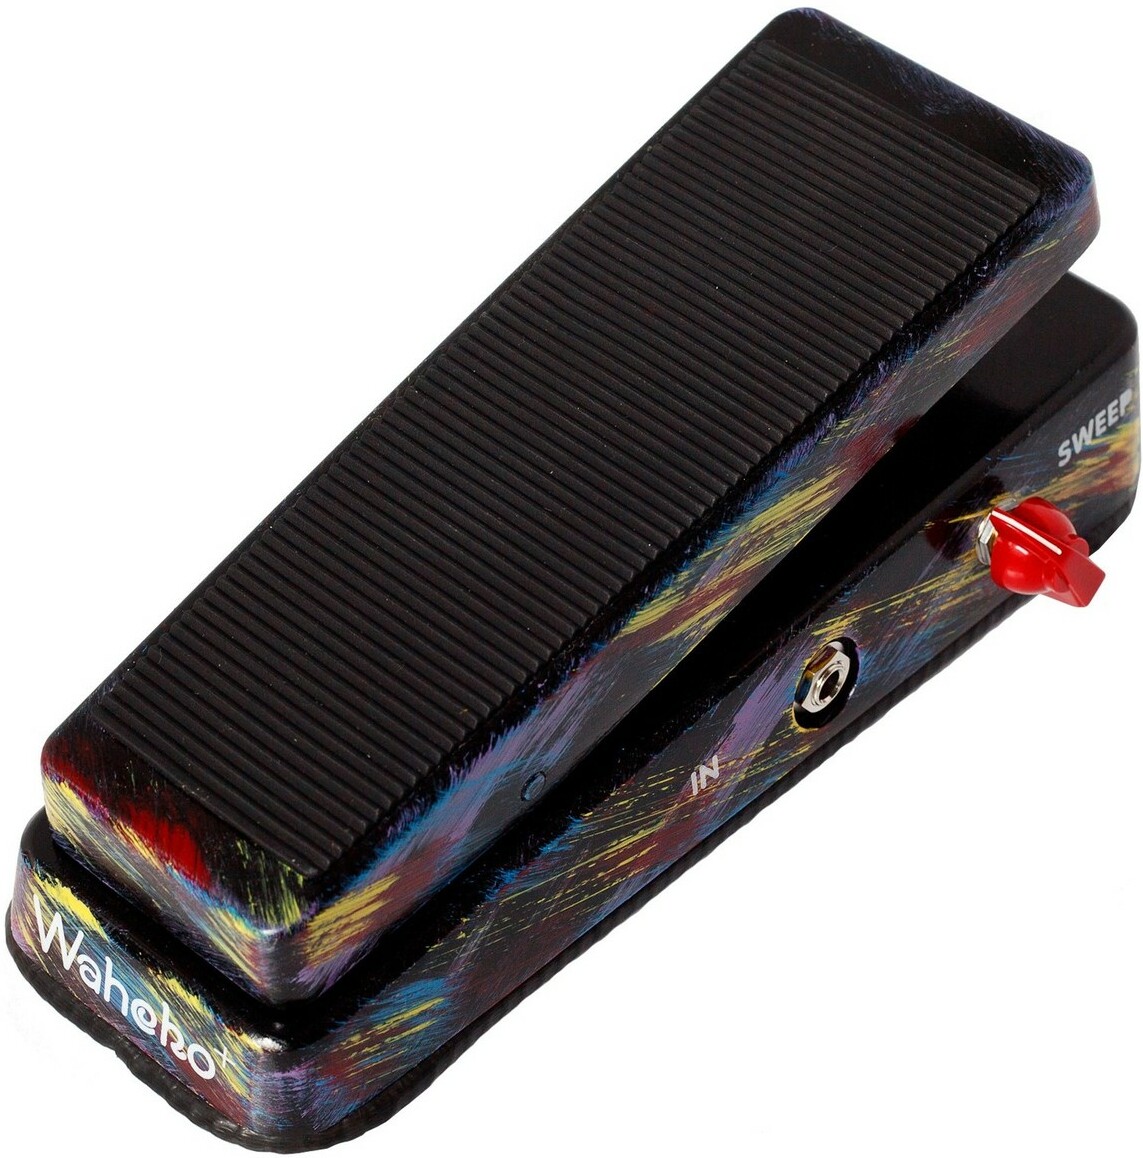 Jam Wahcko Bass - Wah & filter effect pedal for bass - Main picture